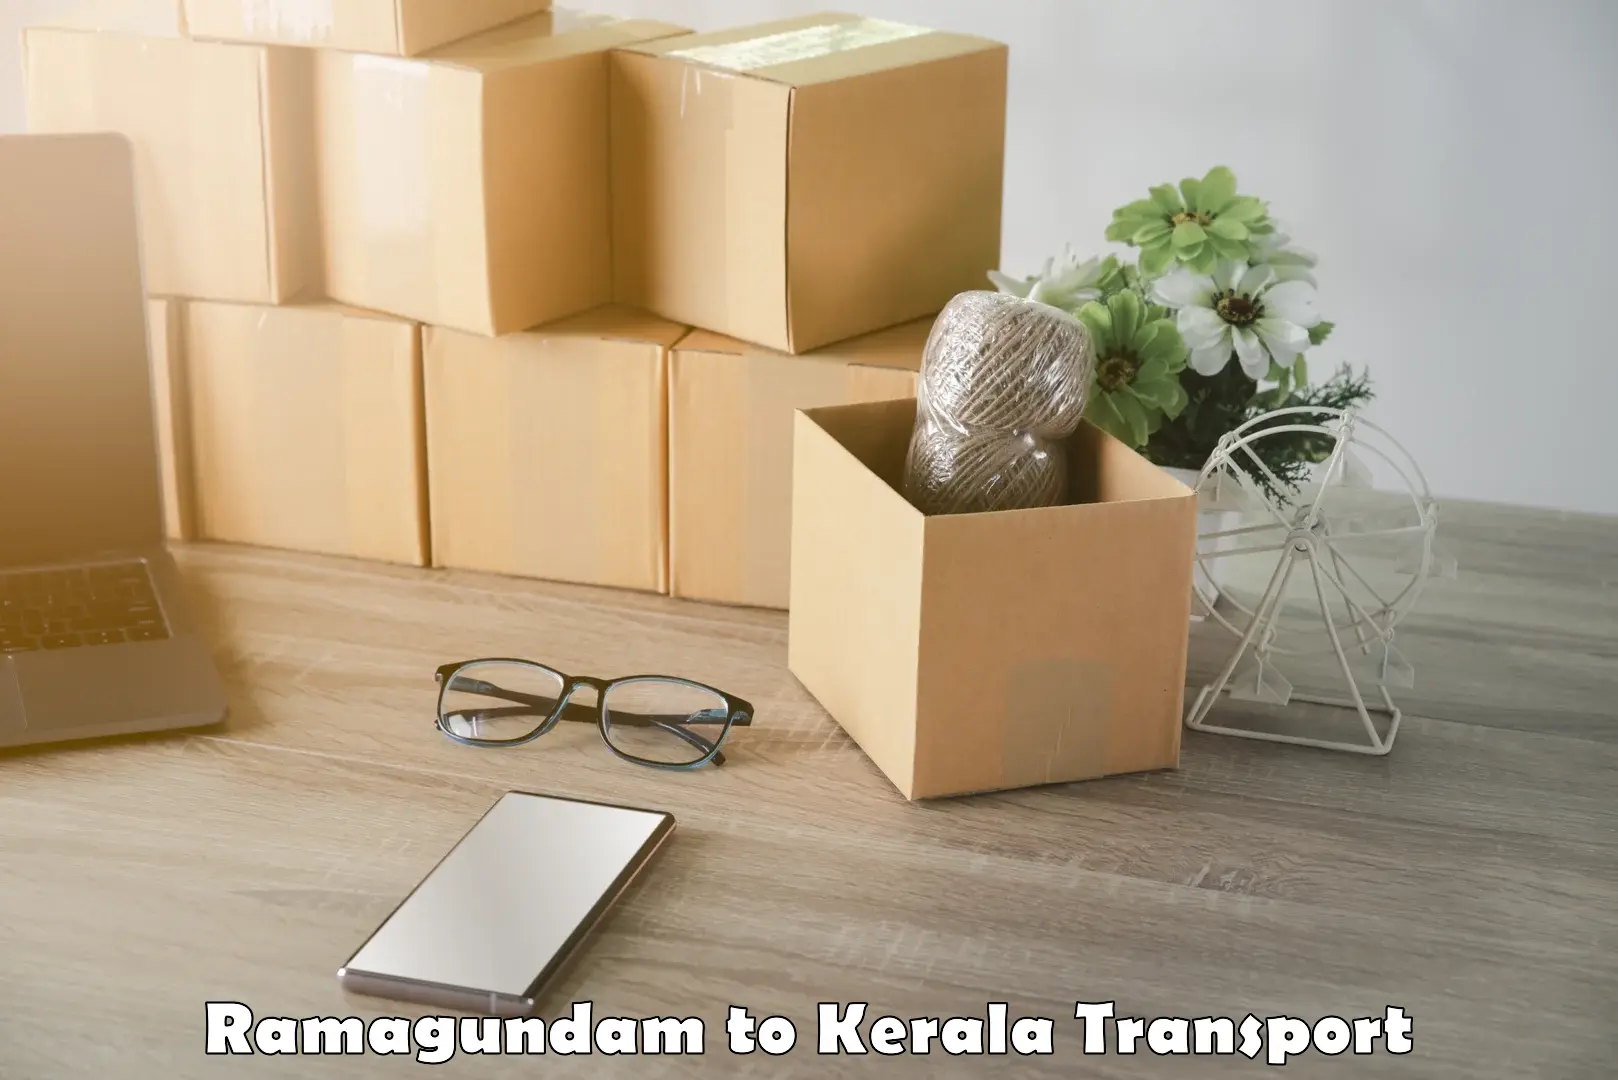 Parcel transport services in Ramagundam to Ernakulam